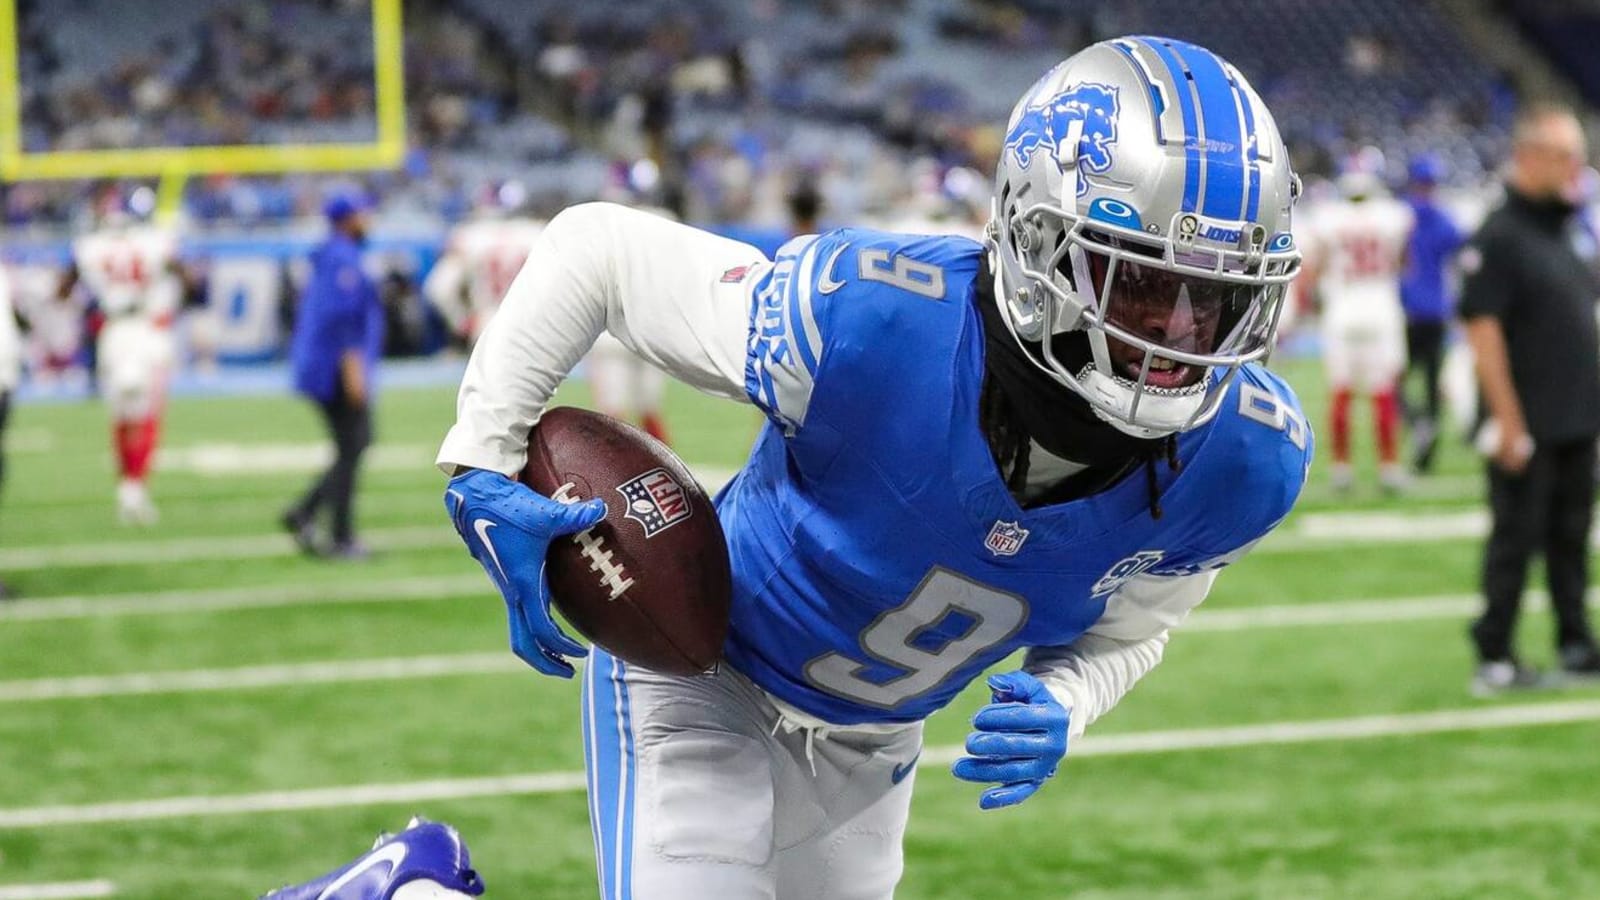 Lions WR set for early return after NFL adjusts gambling rules